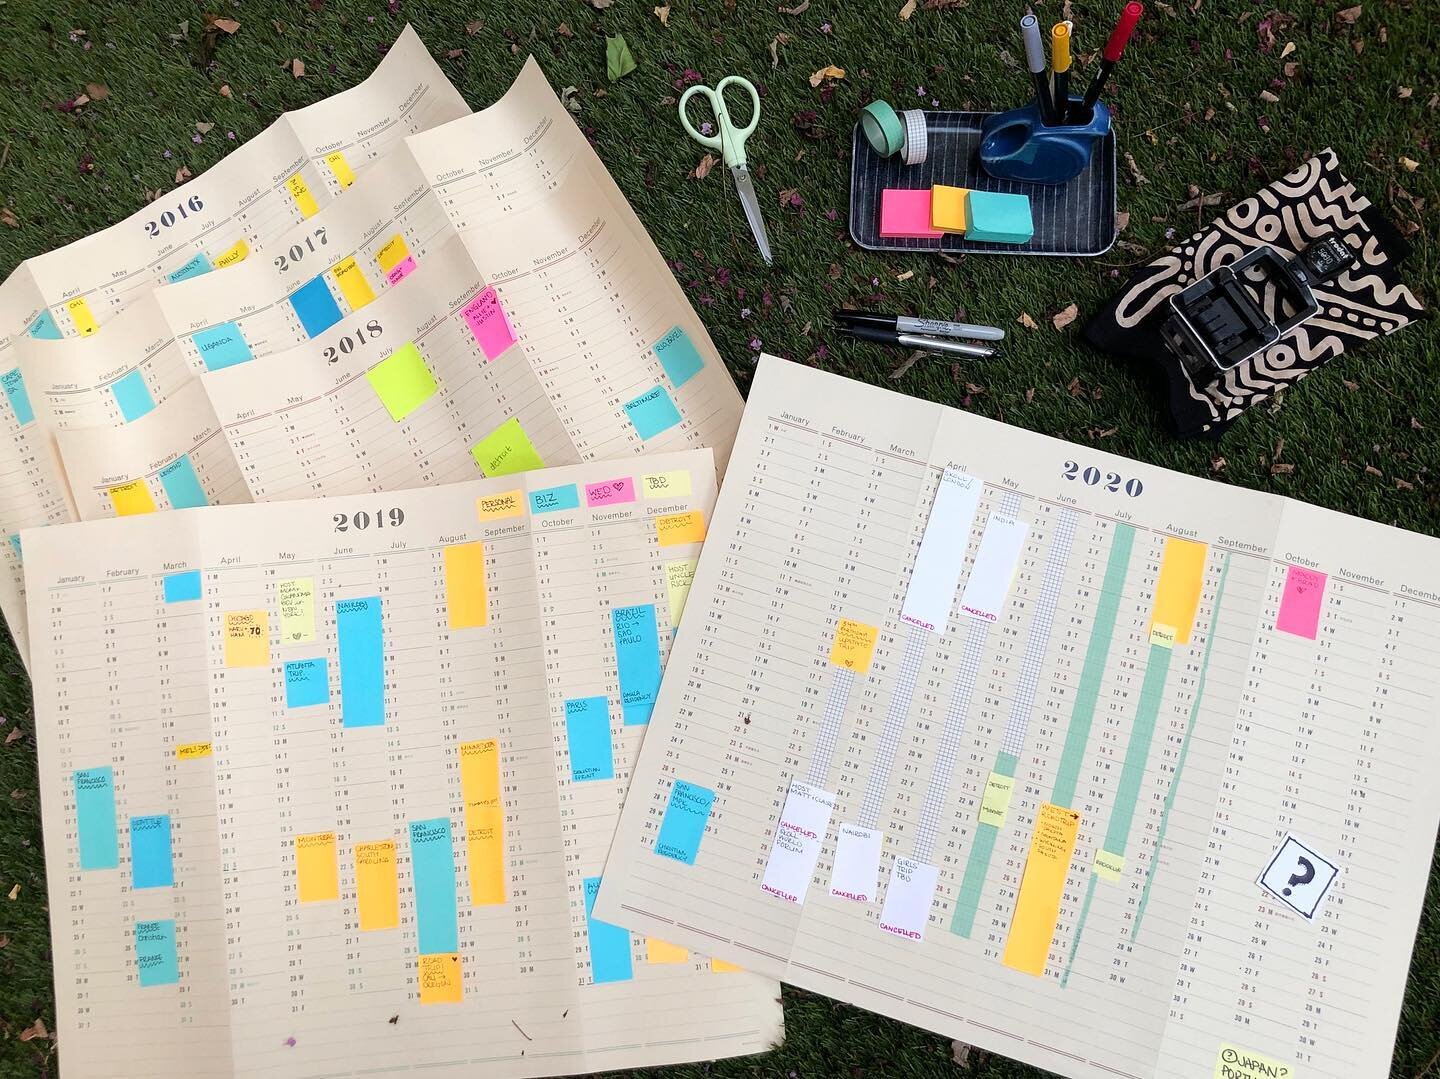 A month ago, I compared my 2020 and 2019 calendars. 

I began tracking my travels with these analog calendars about five years ago. I had just moved to New York and began a job that took me all over the world. 

I needed some way to track the days. T